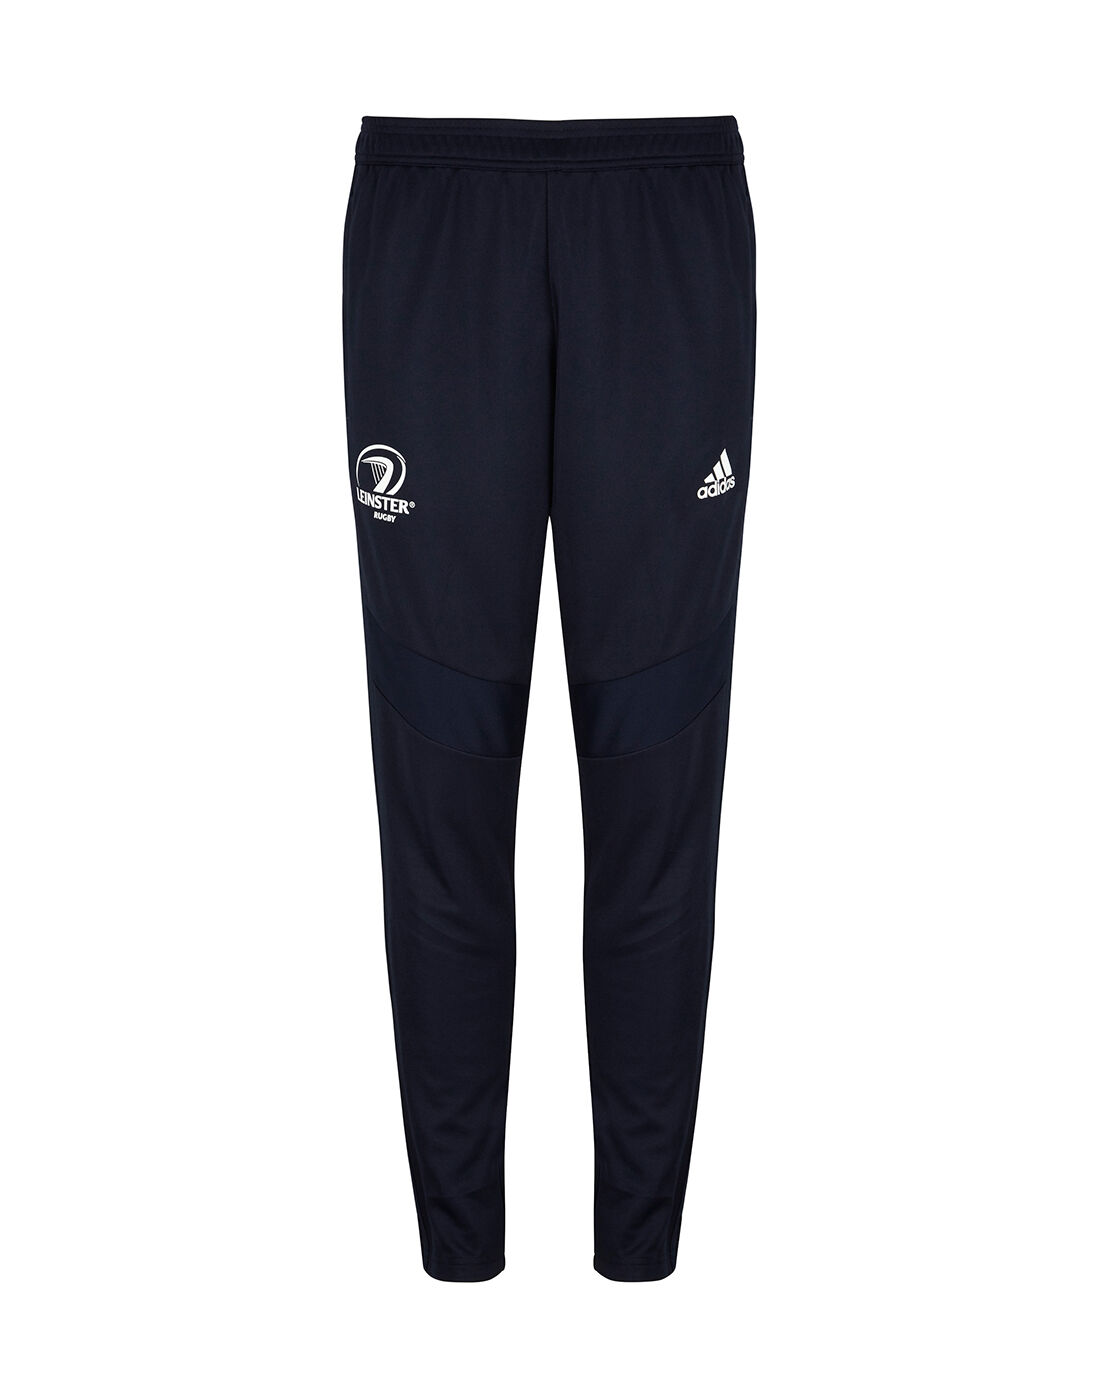 adidas rugby pants